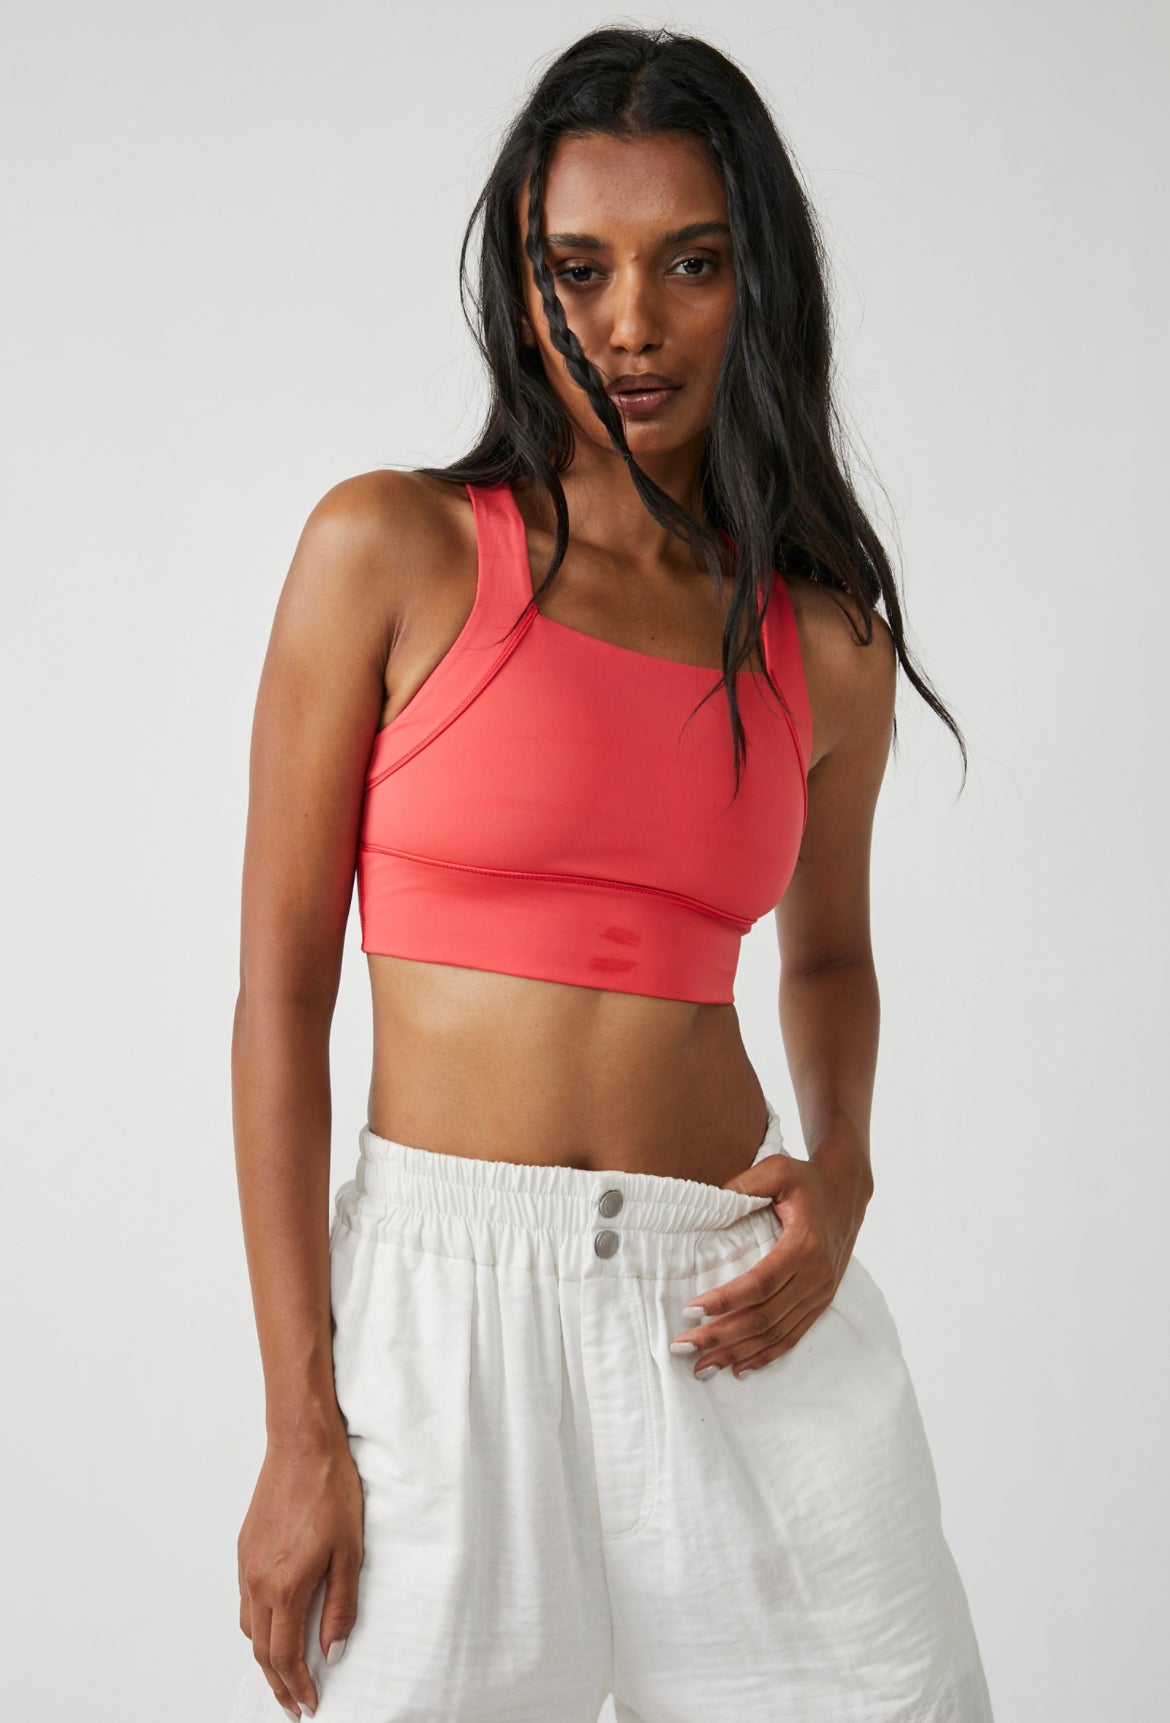 FREE PEOPLE FP Movement - Out Of Your League Bra in Nightshade